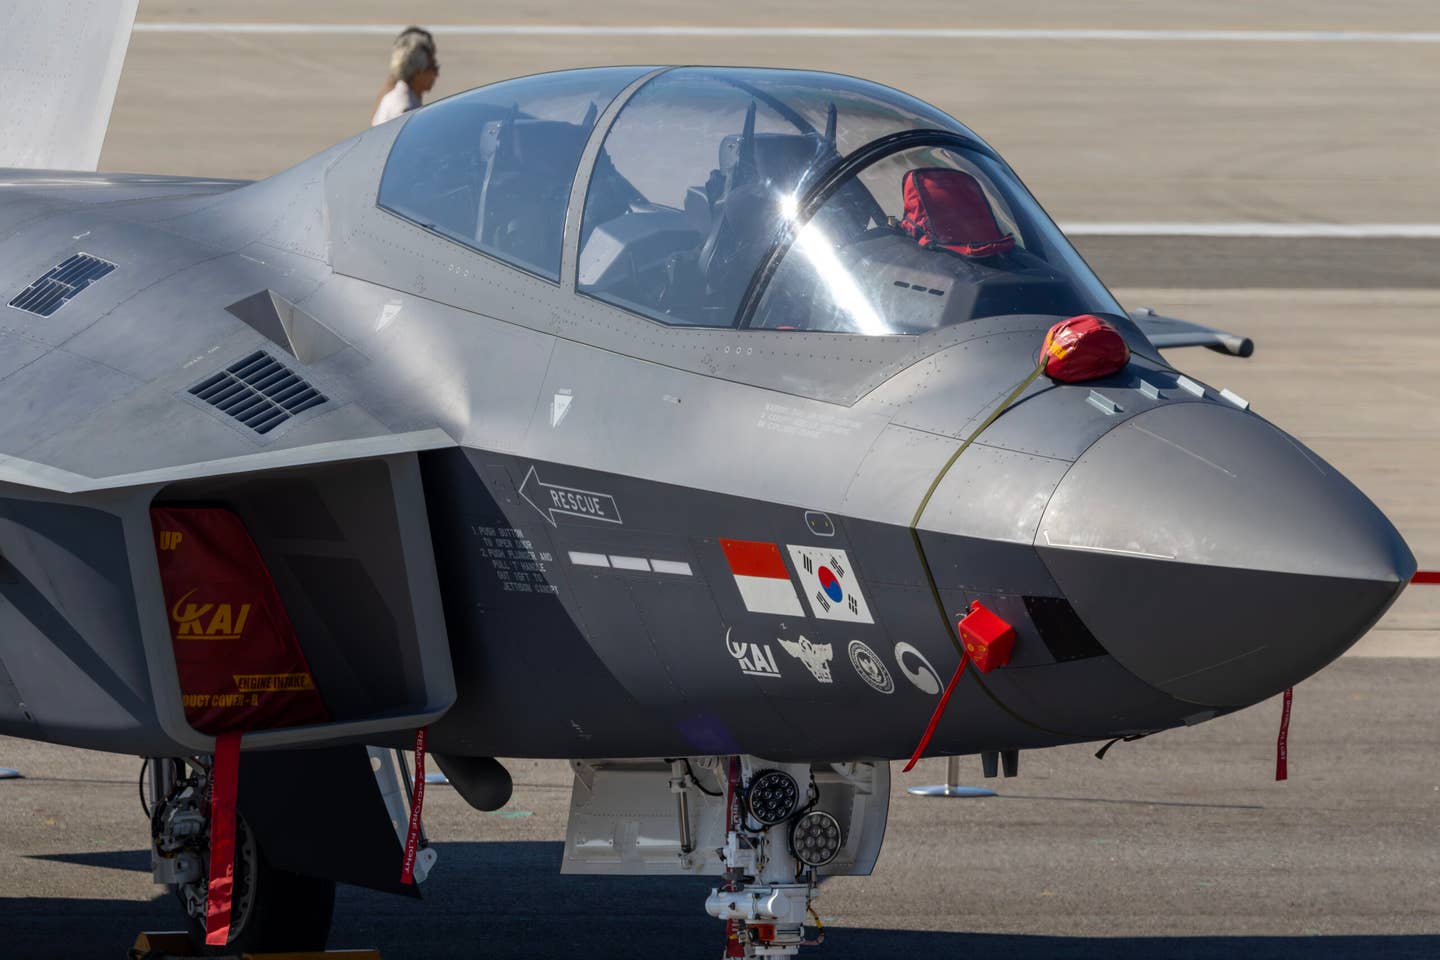 A two-seat KF-21 fighter, the sixth prototype, on display during the Seoul International Aerospace and Defense Exhibition (ADEX) in Seongnam, South Korea, on October 17, 2023. <em>Photo by Zhang Hui/VCG via Getty Images</em>